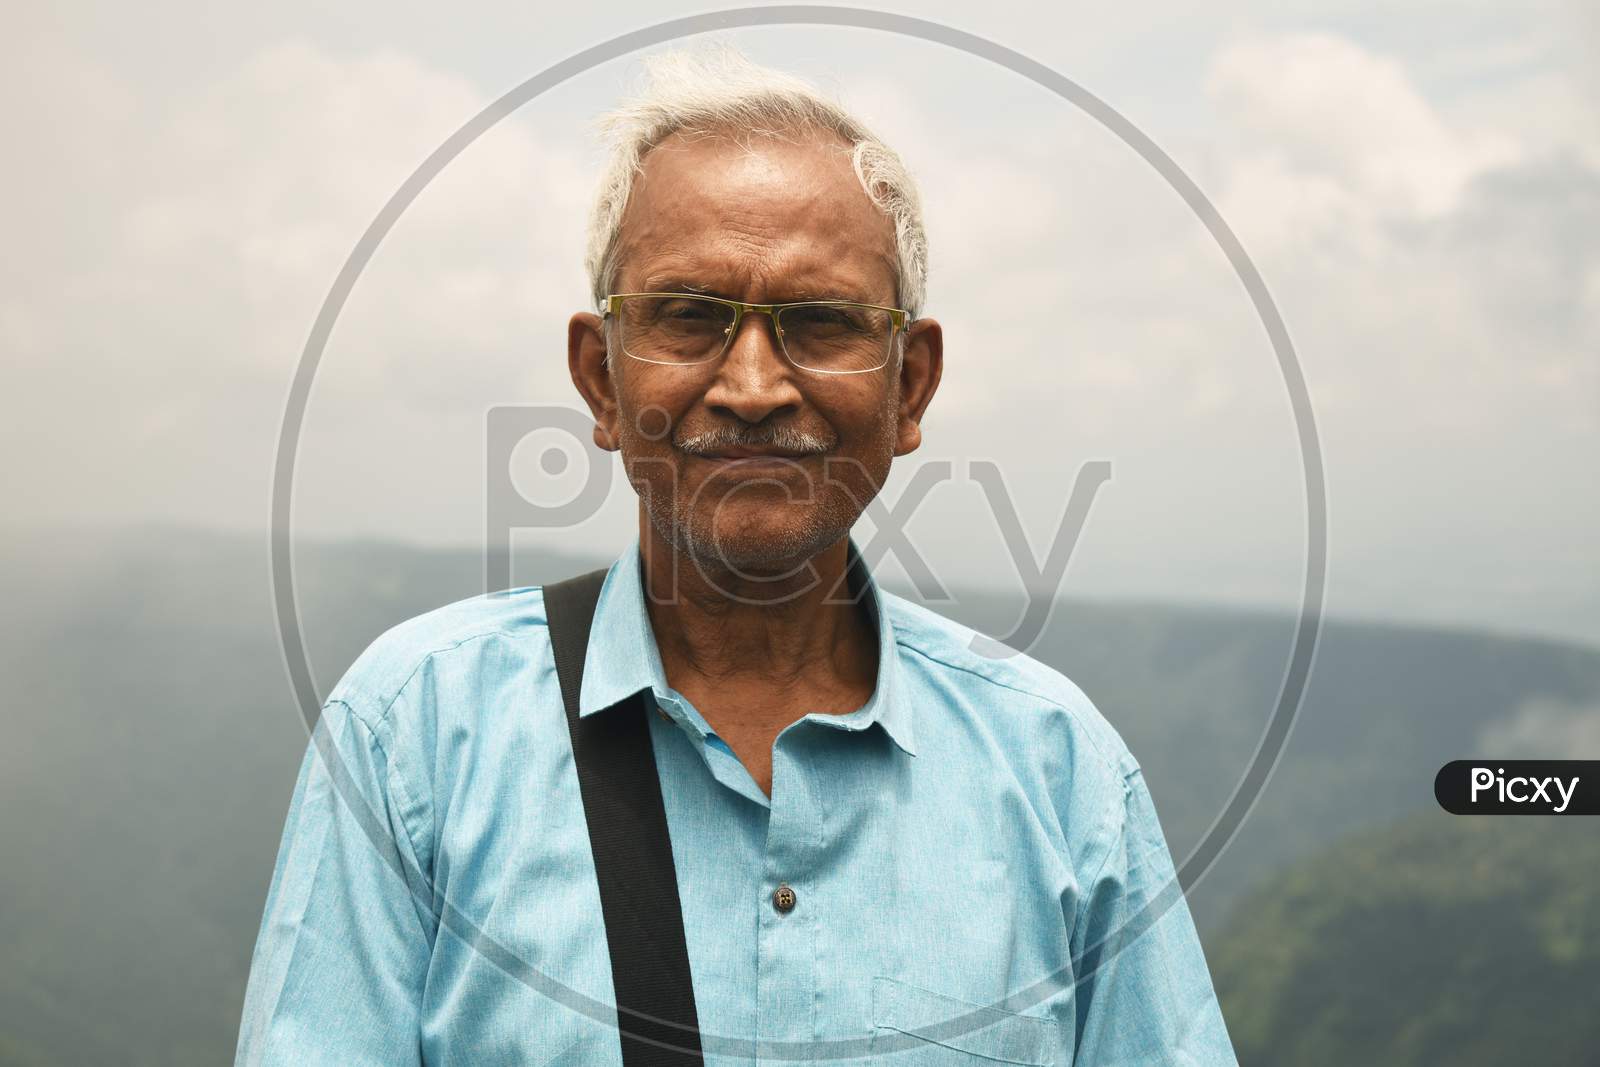 An Old Man, Wearing Spectacles And Blue Shirt, Standing Alone In Nature A Blurry Mountain Background. The Elder Person With A Side Bag On His Shoulder, Looking Towards The Camera. Copy Space For Text.